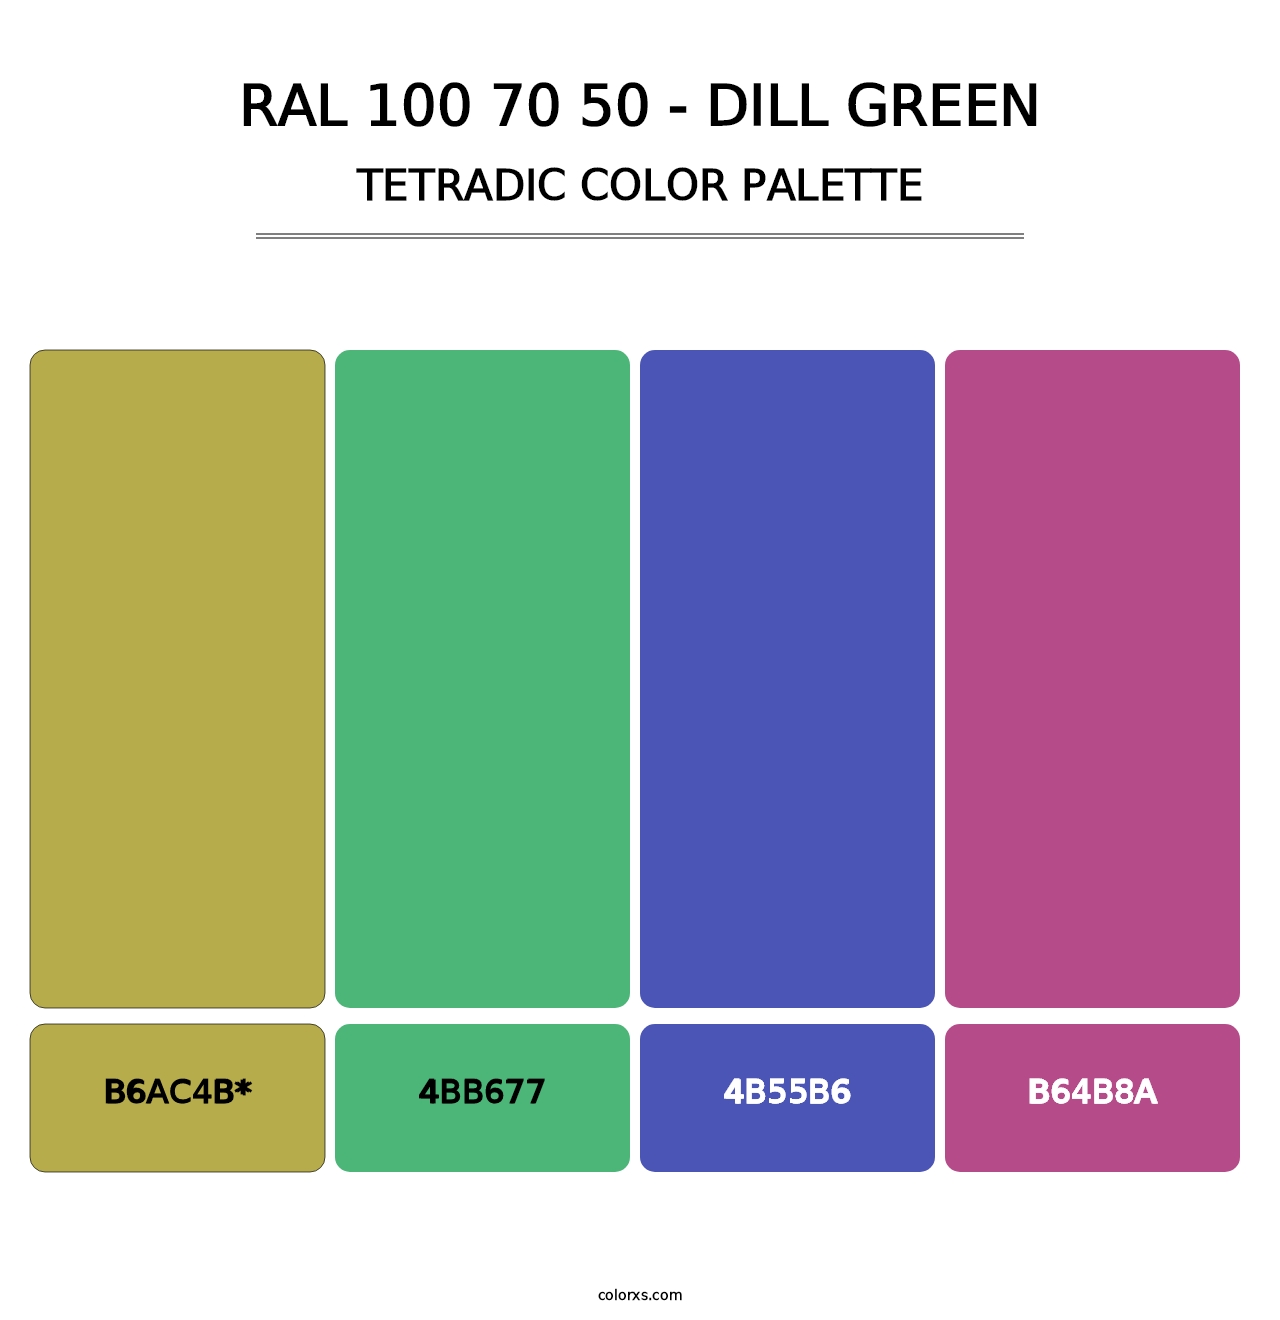 RAL 100 70 50 - Dill Green - Tetradic Color Palette